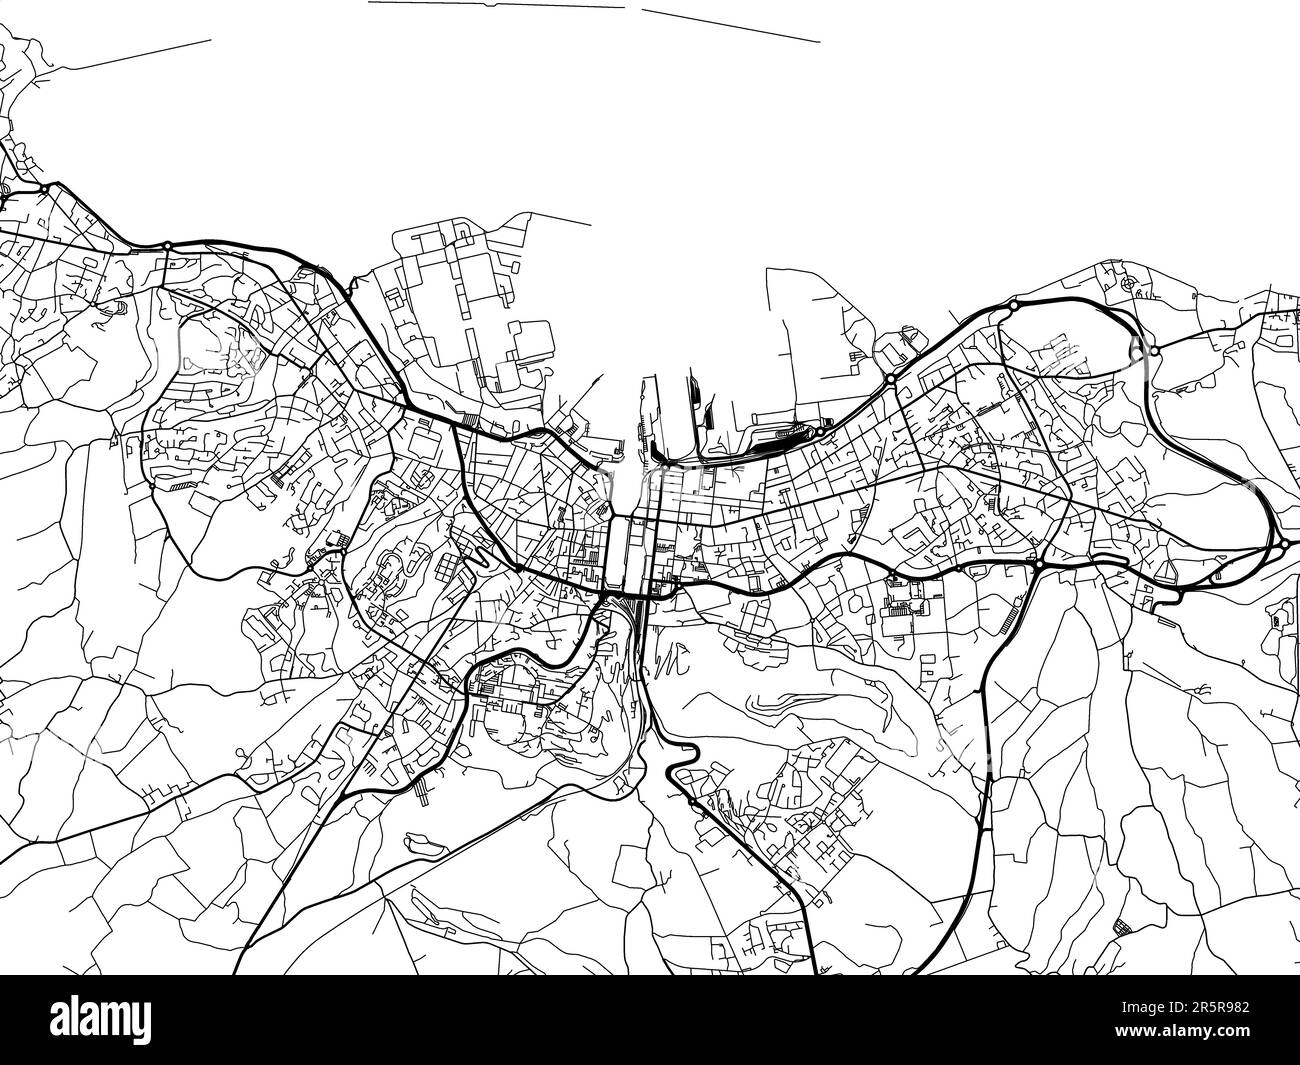 Road map of the city of  Cherbourg-en-Cotentin in France on a white background. Stock Photo